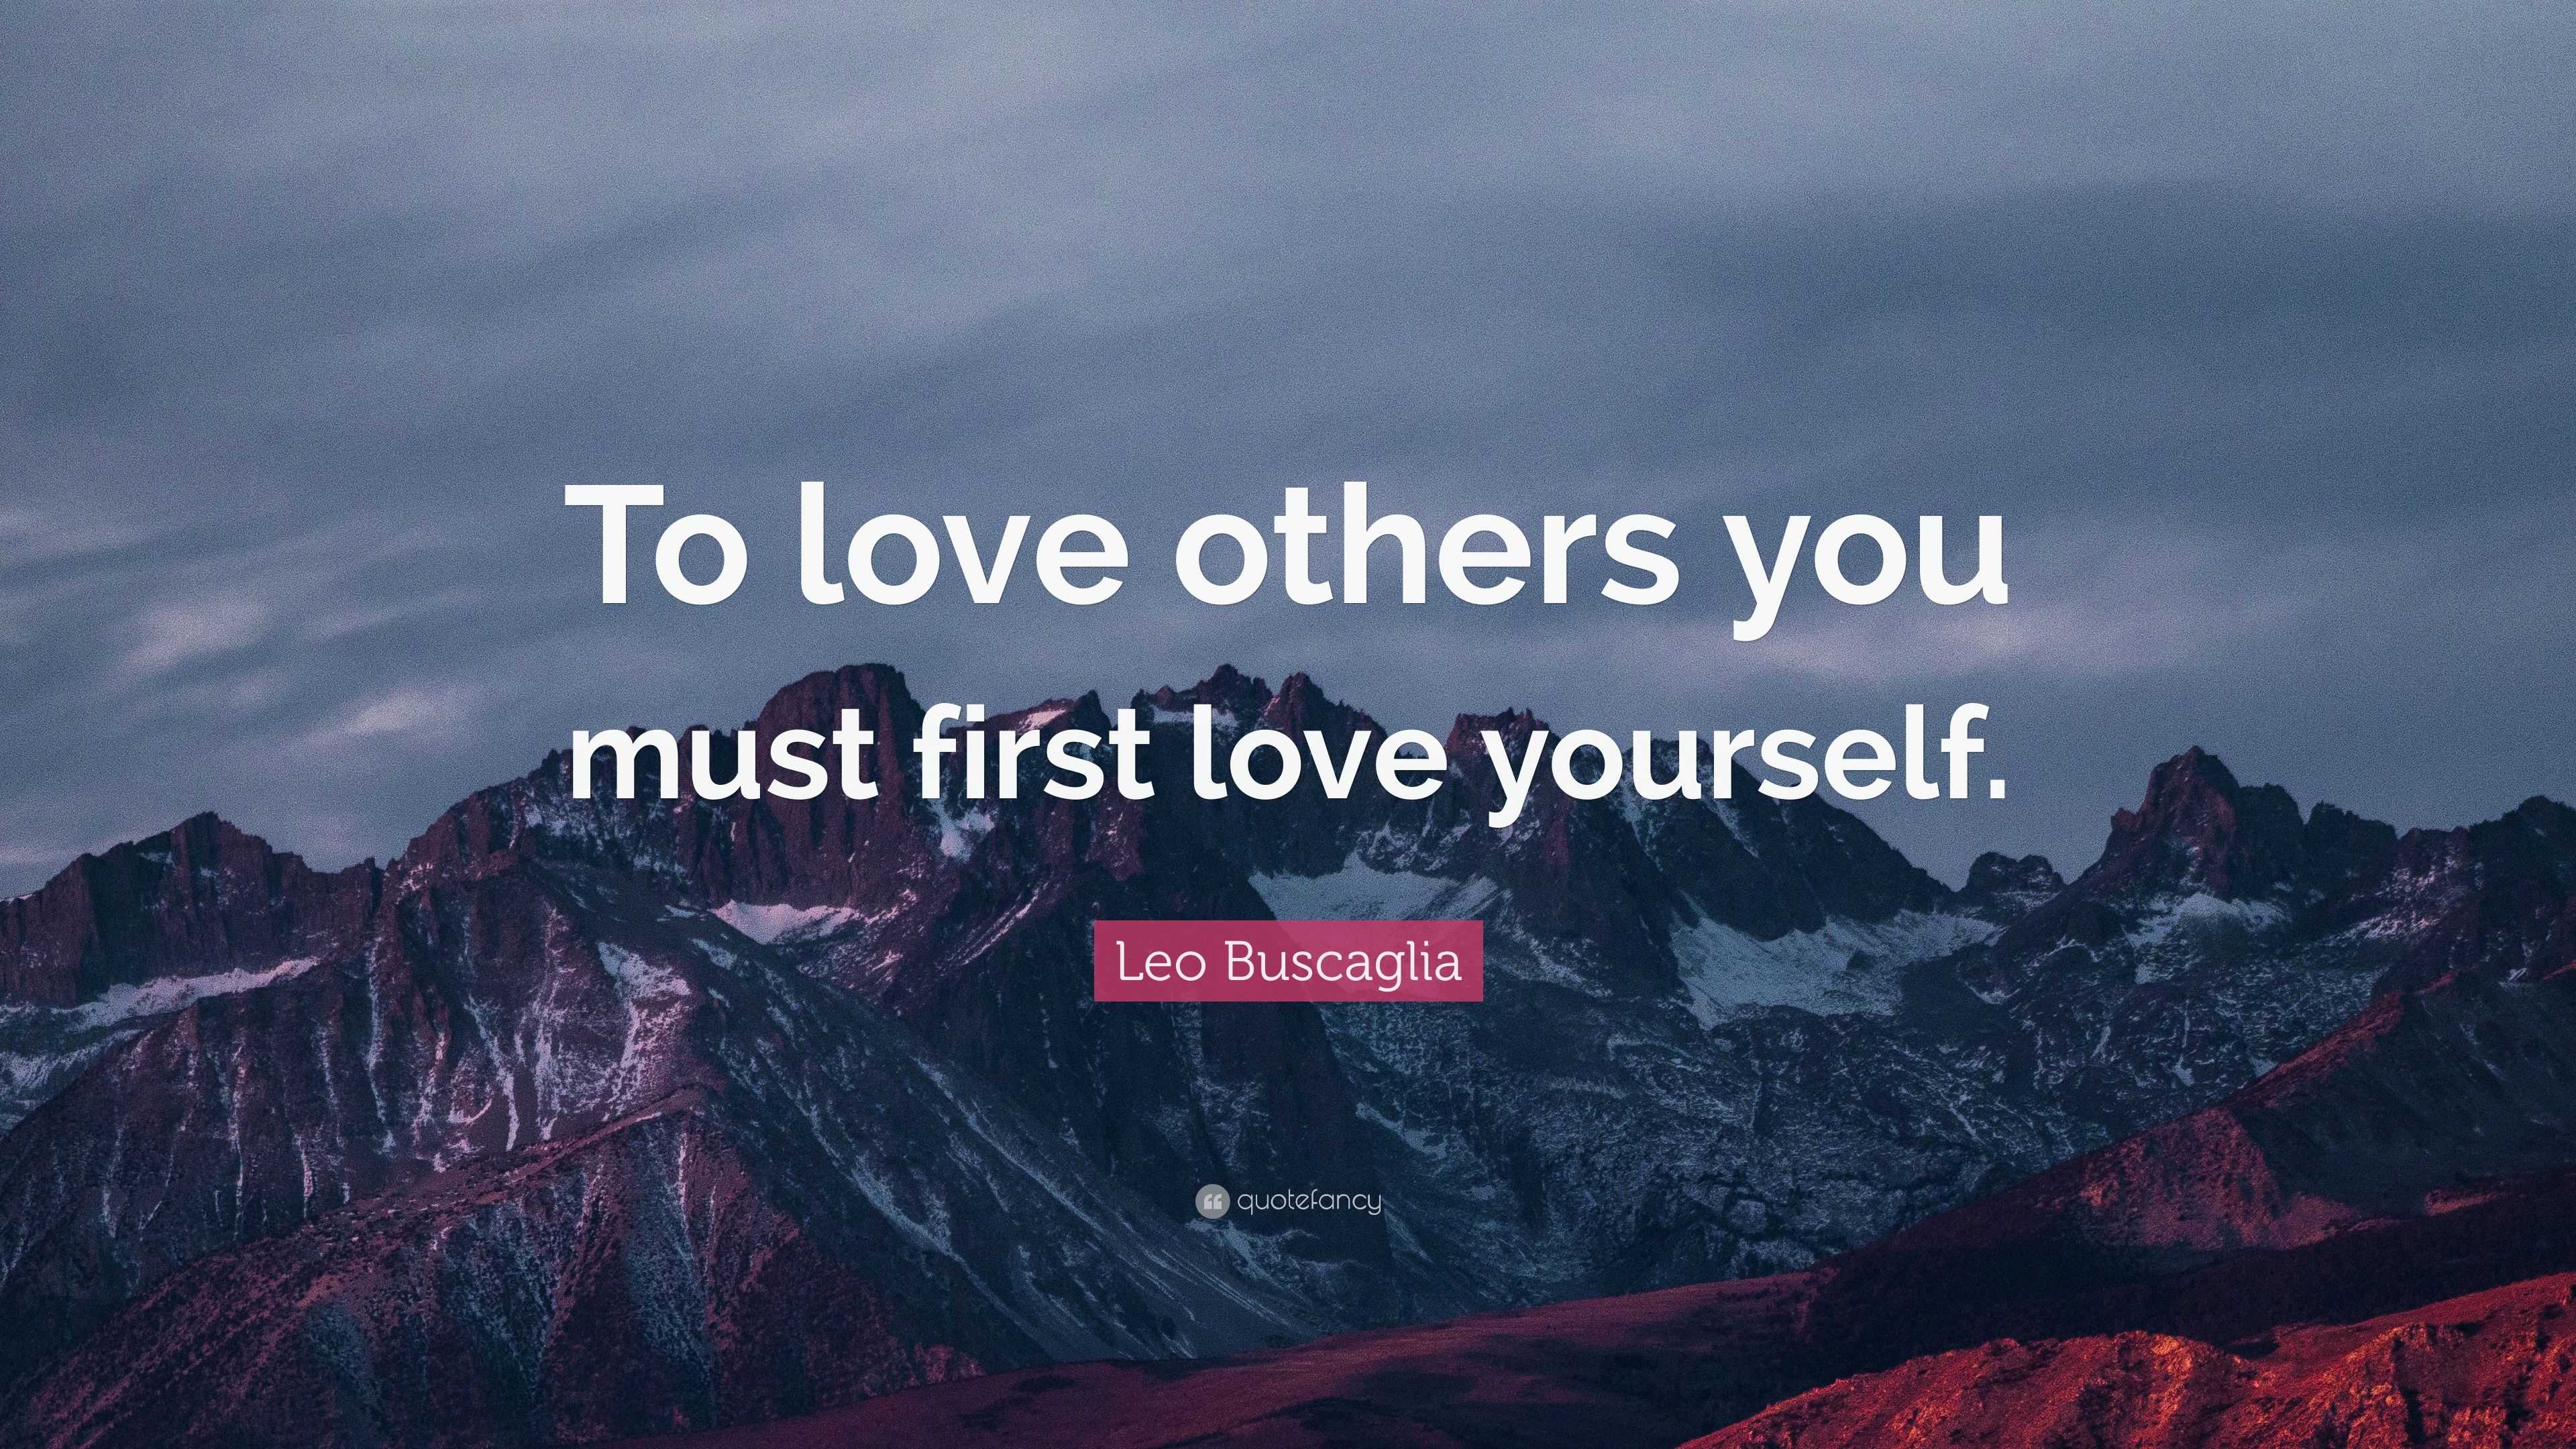 Leo Buscaglia Quote: “To love others you must first love yourself.”